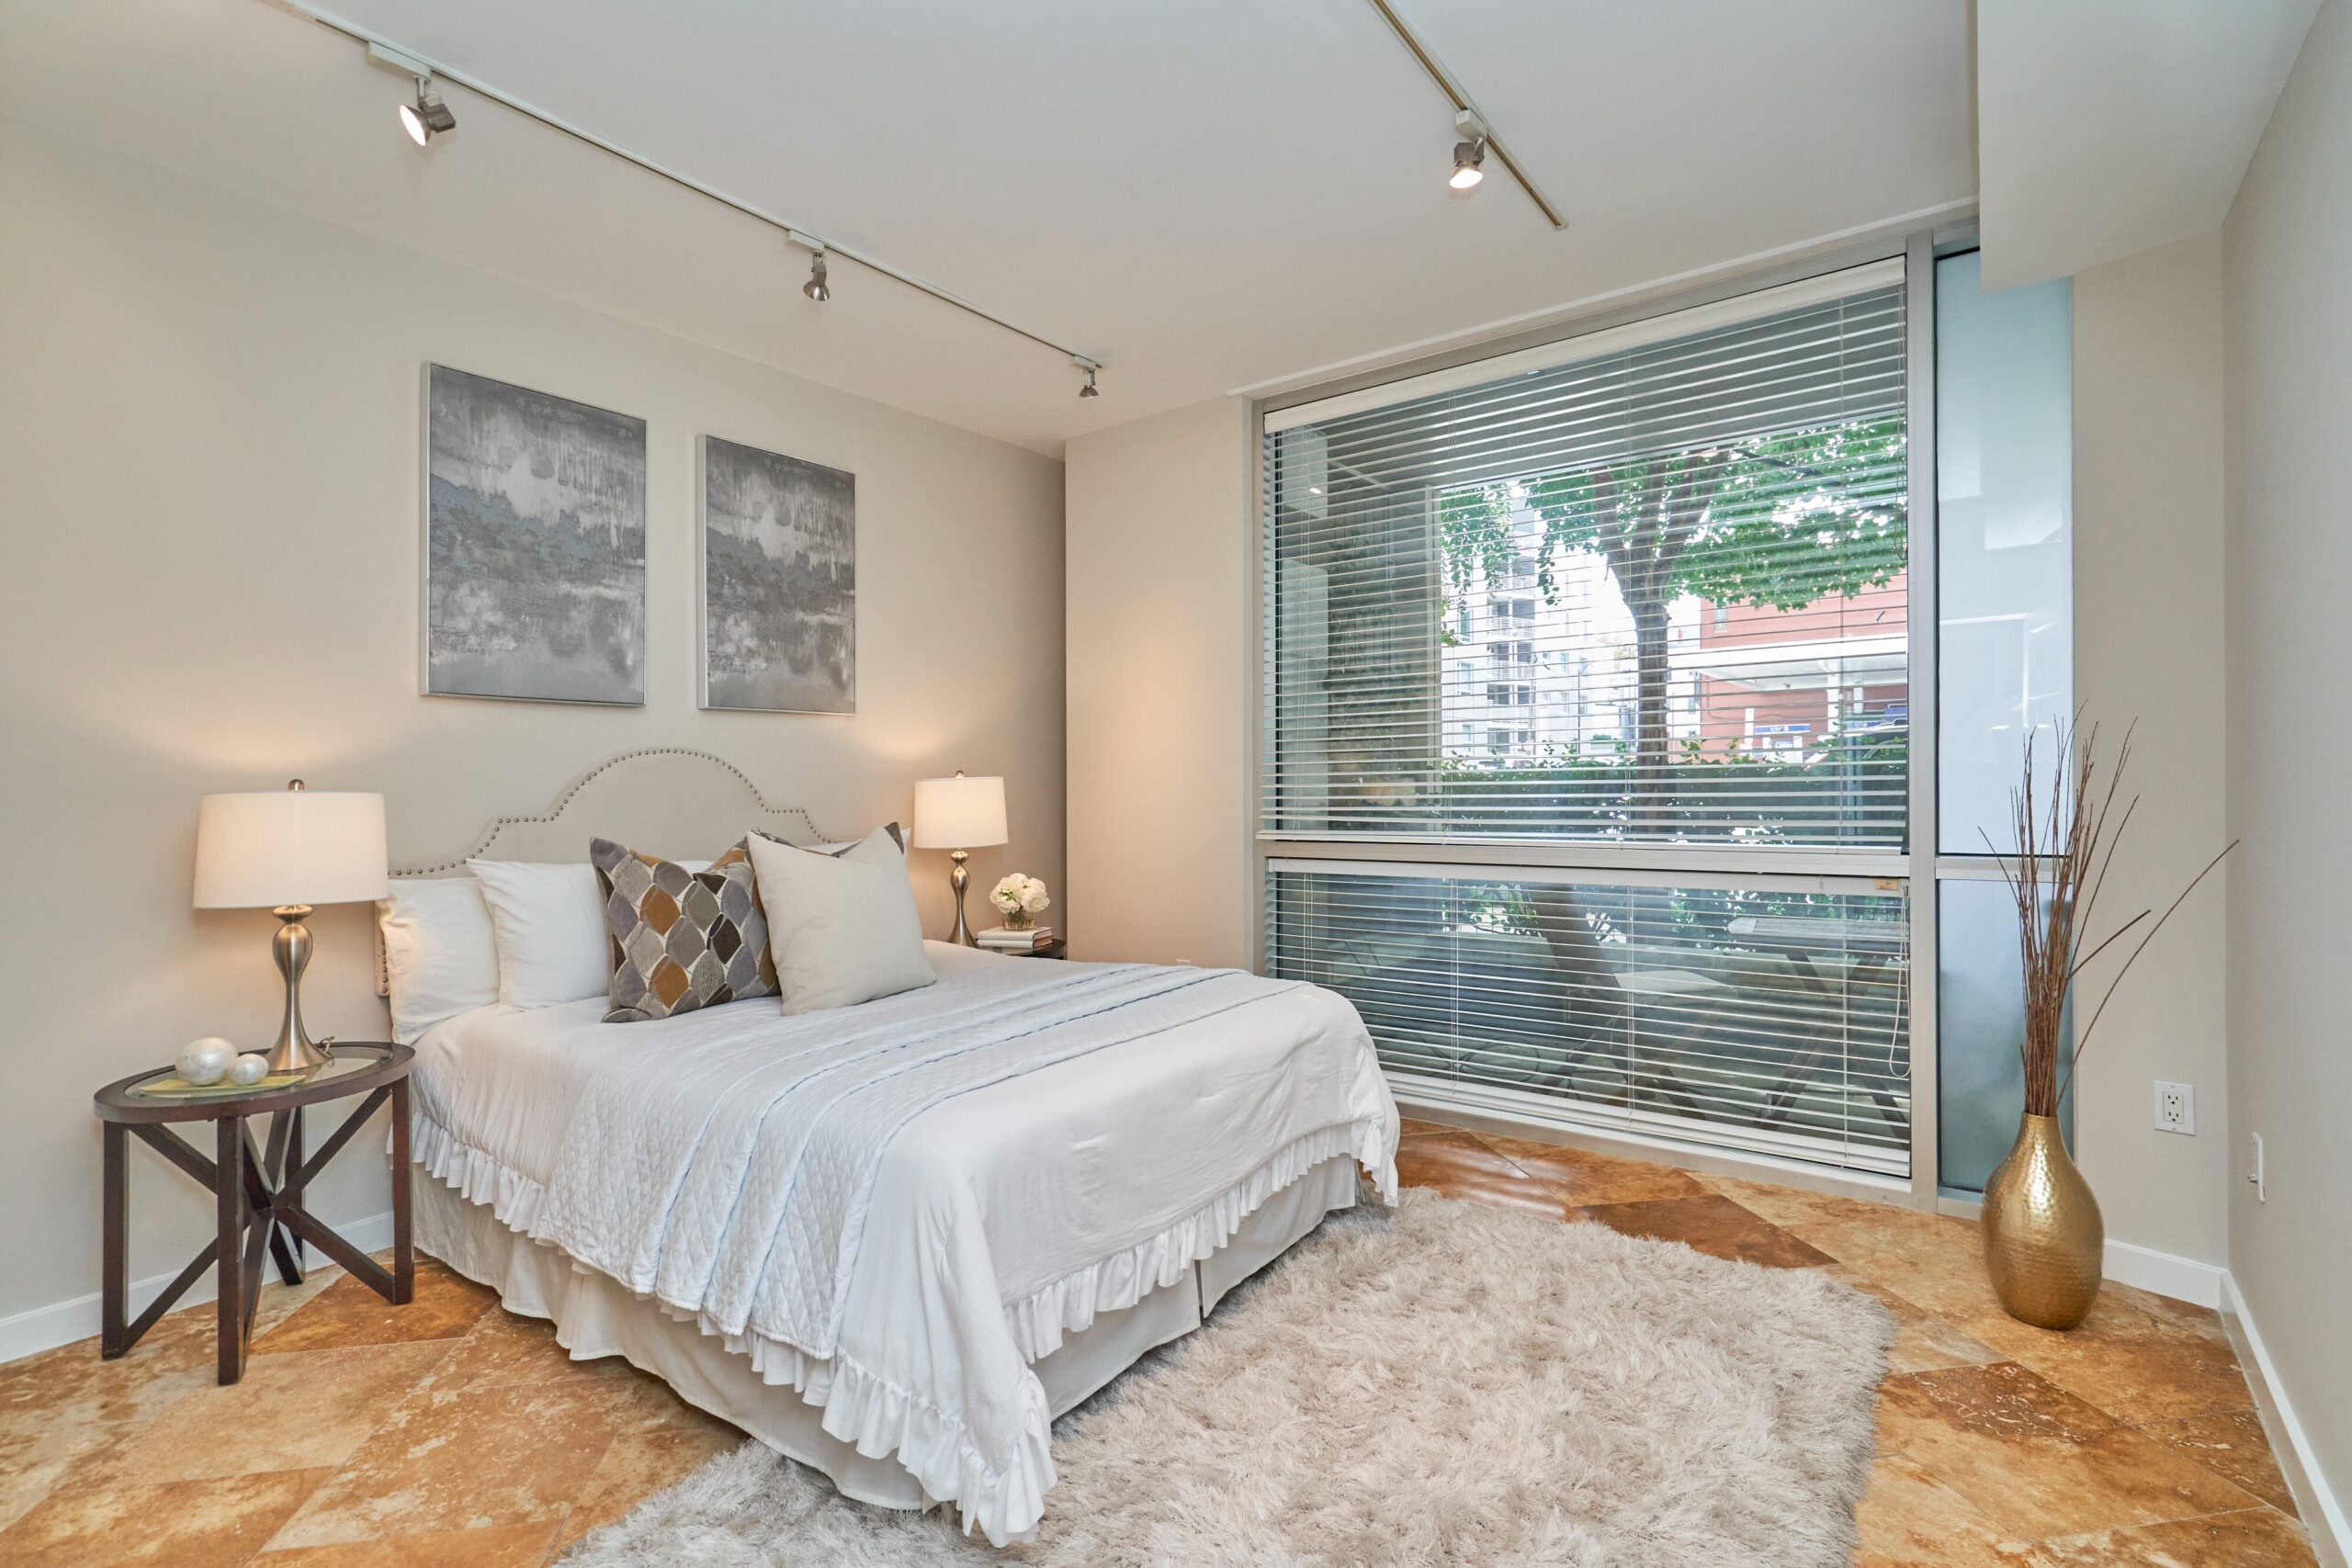 Professional interior photo of 1300 13th St NW #102, Washington DC - showing the primary bedroom with marble floors, floor-to-ceiling windows looking out over the patio